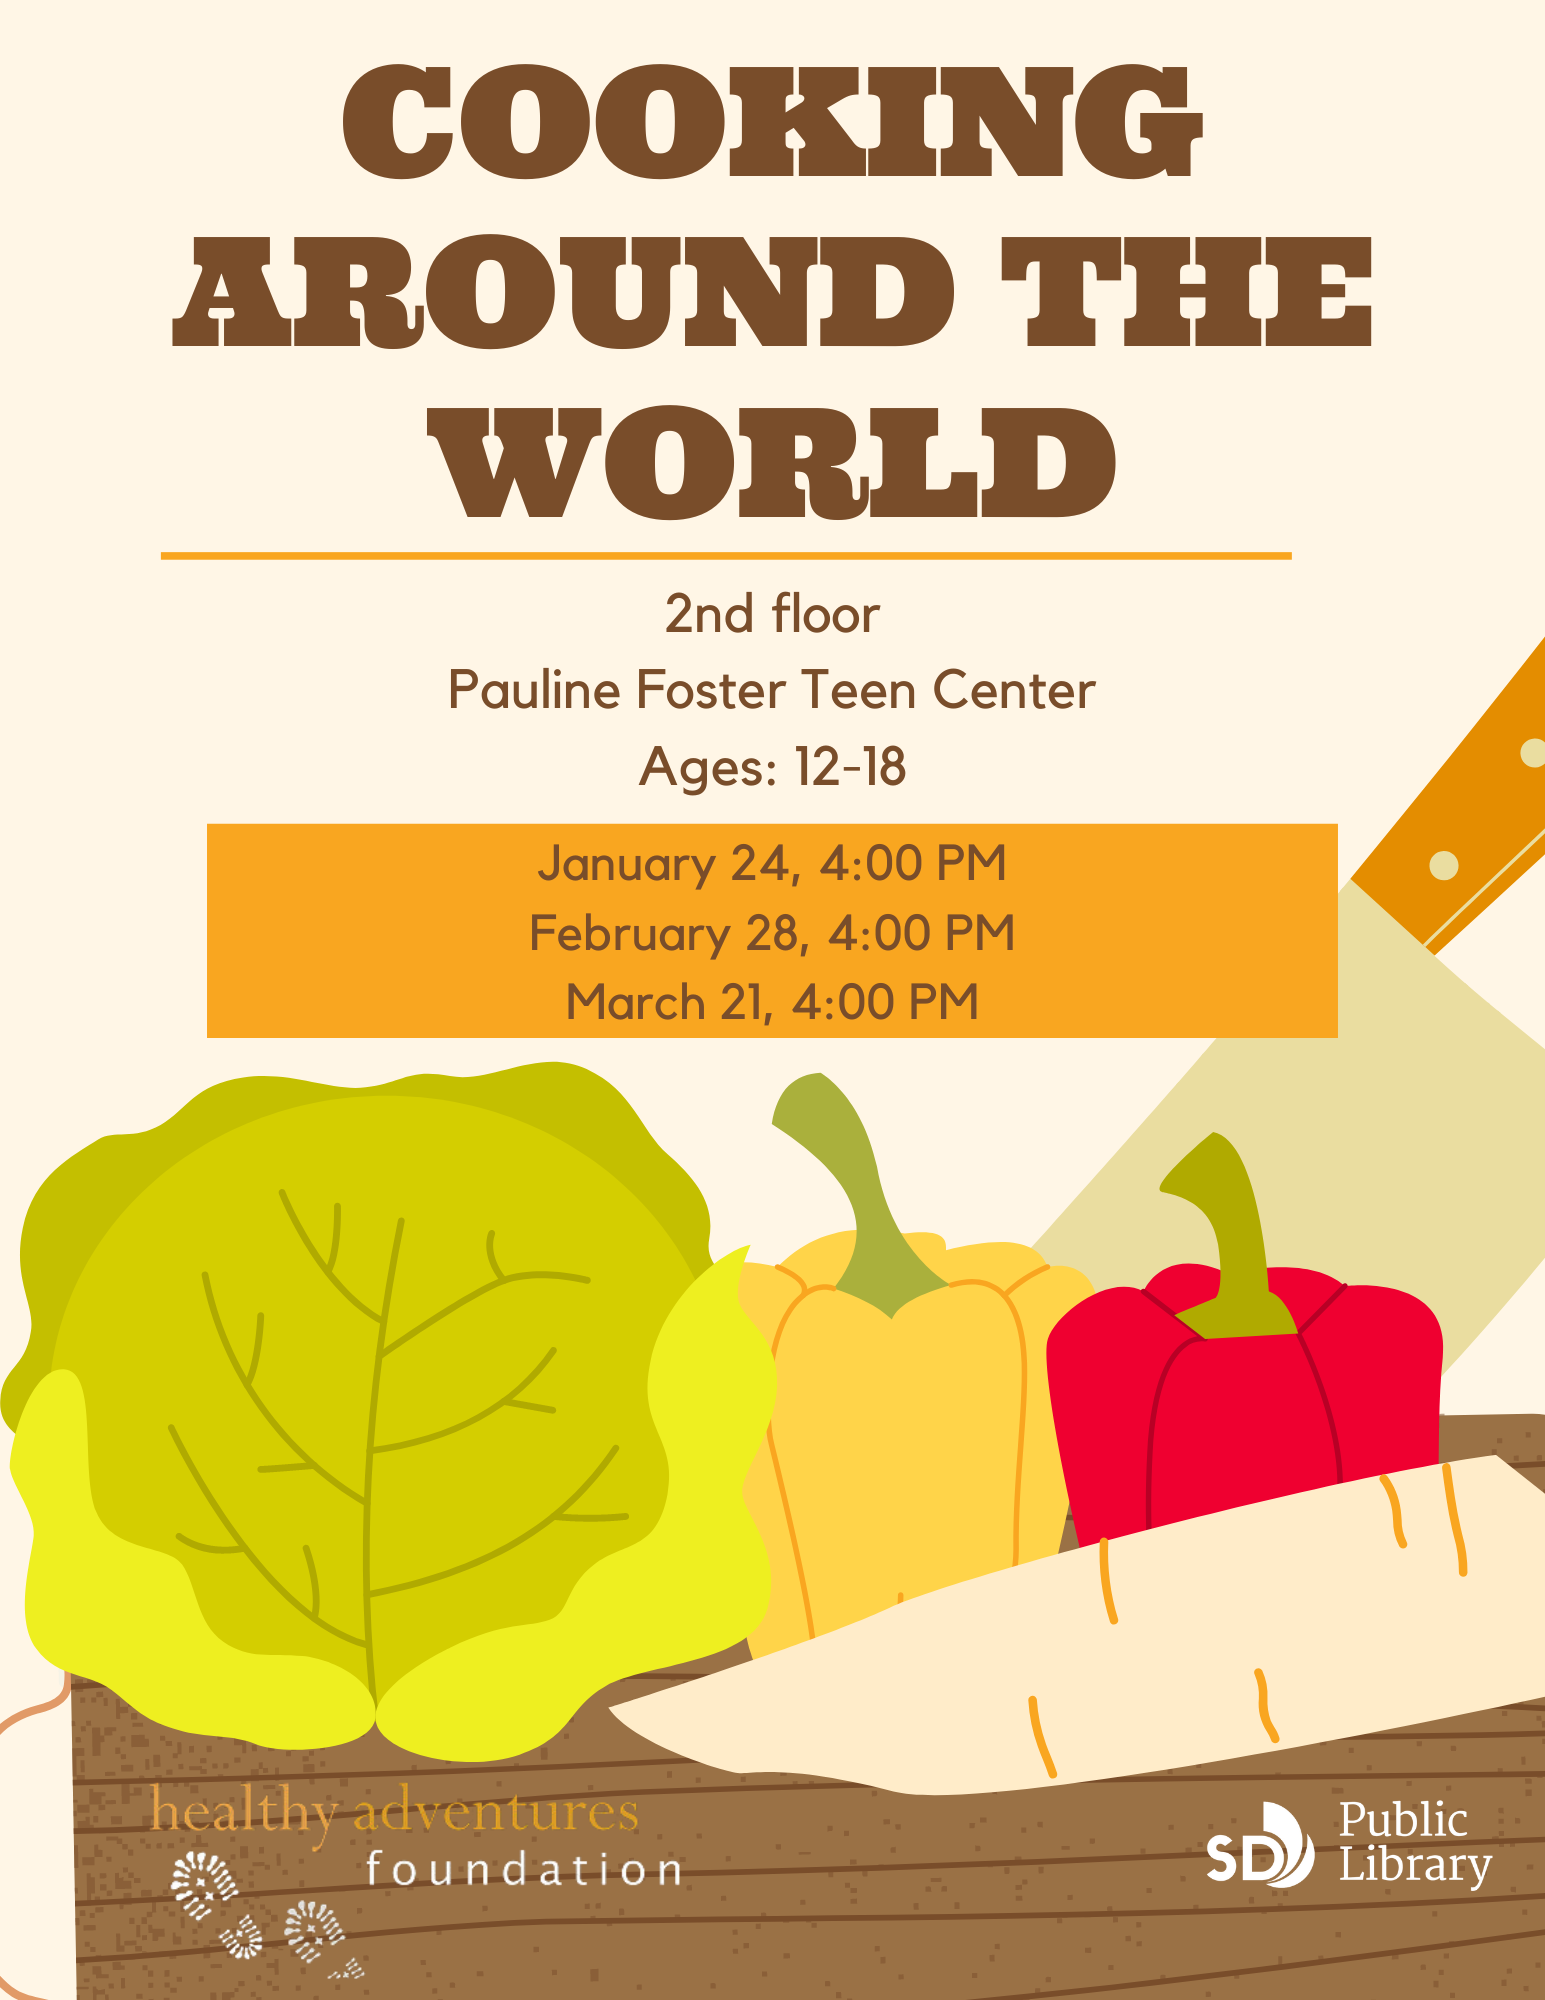 Cooking Around the World. 2nd floor, Pauline Foster Teen Center, Ages 12-18. January 24, February 28, March 21 at 4pm.